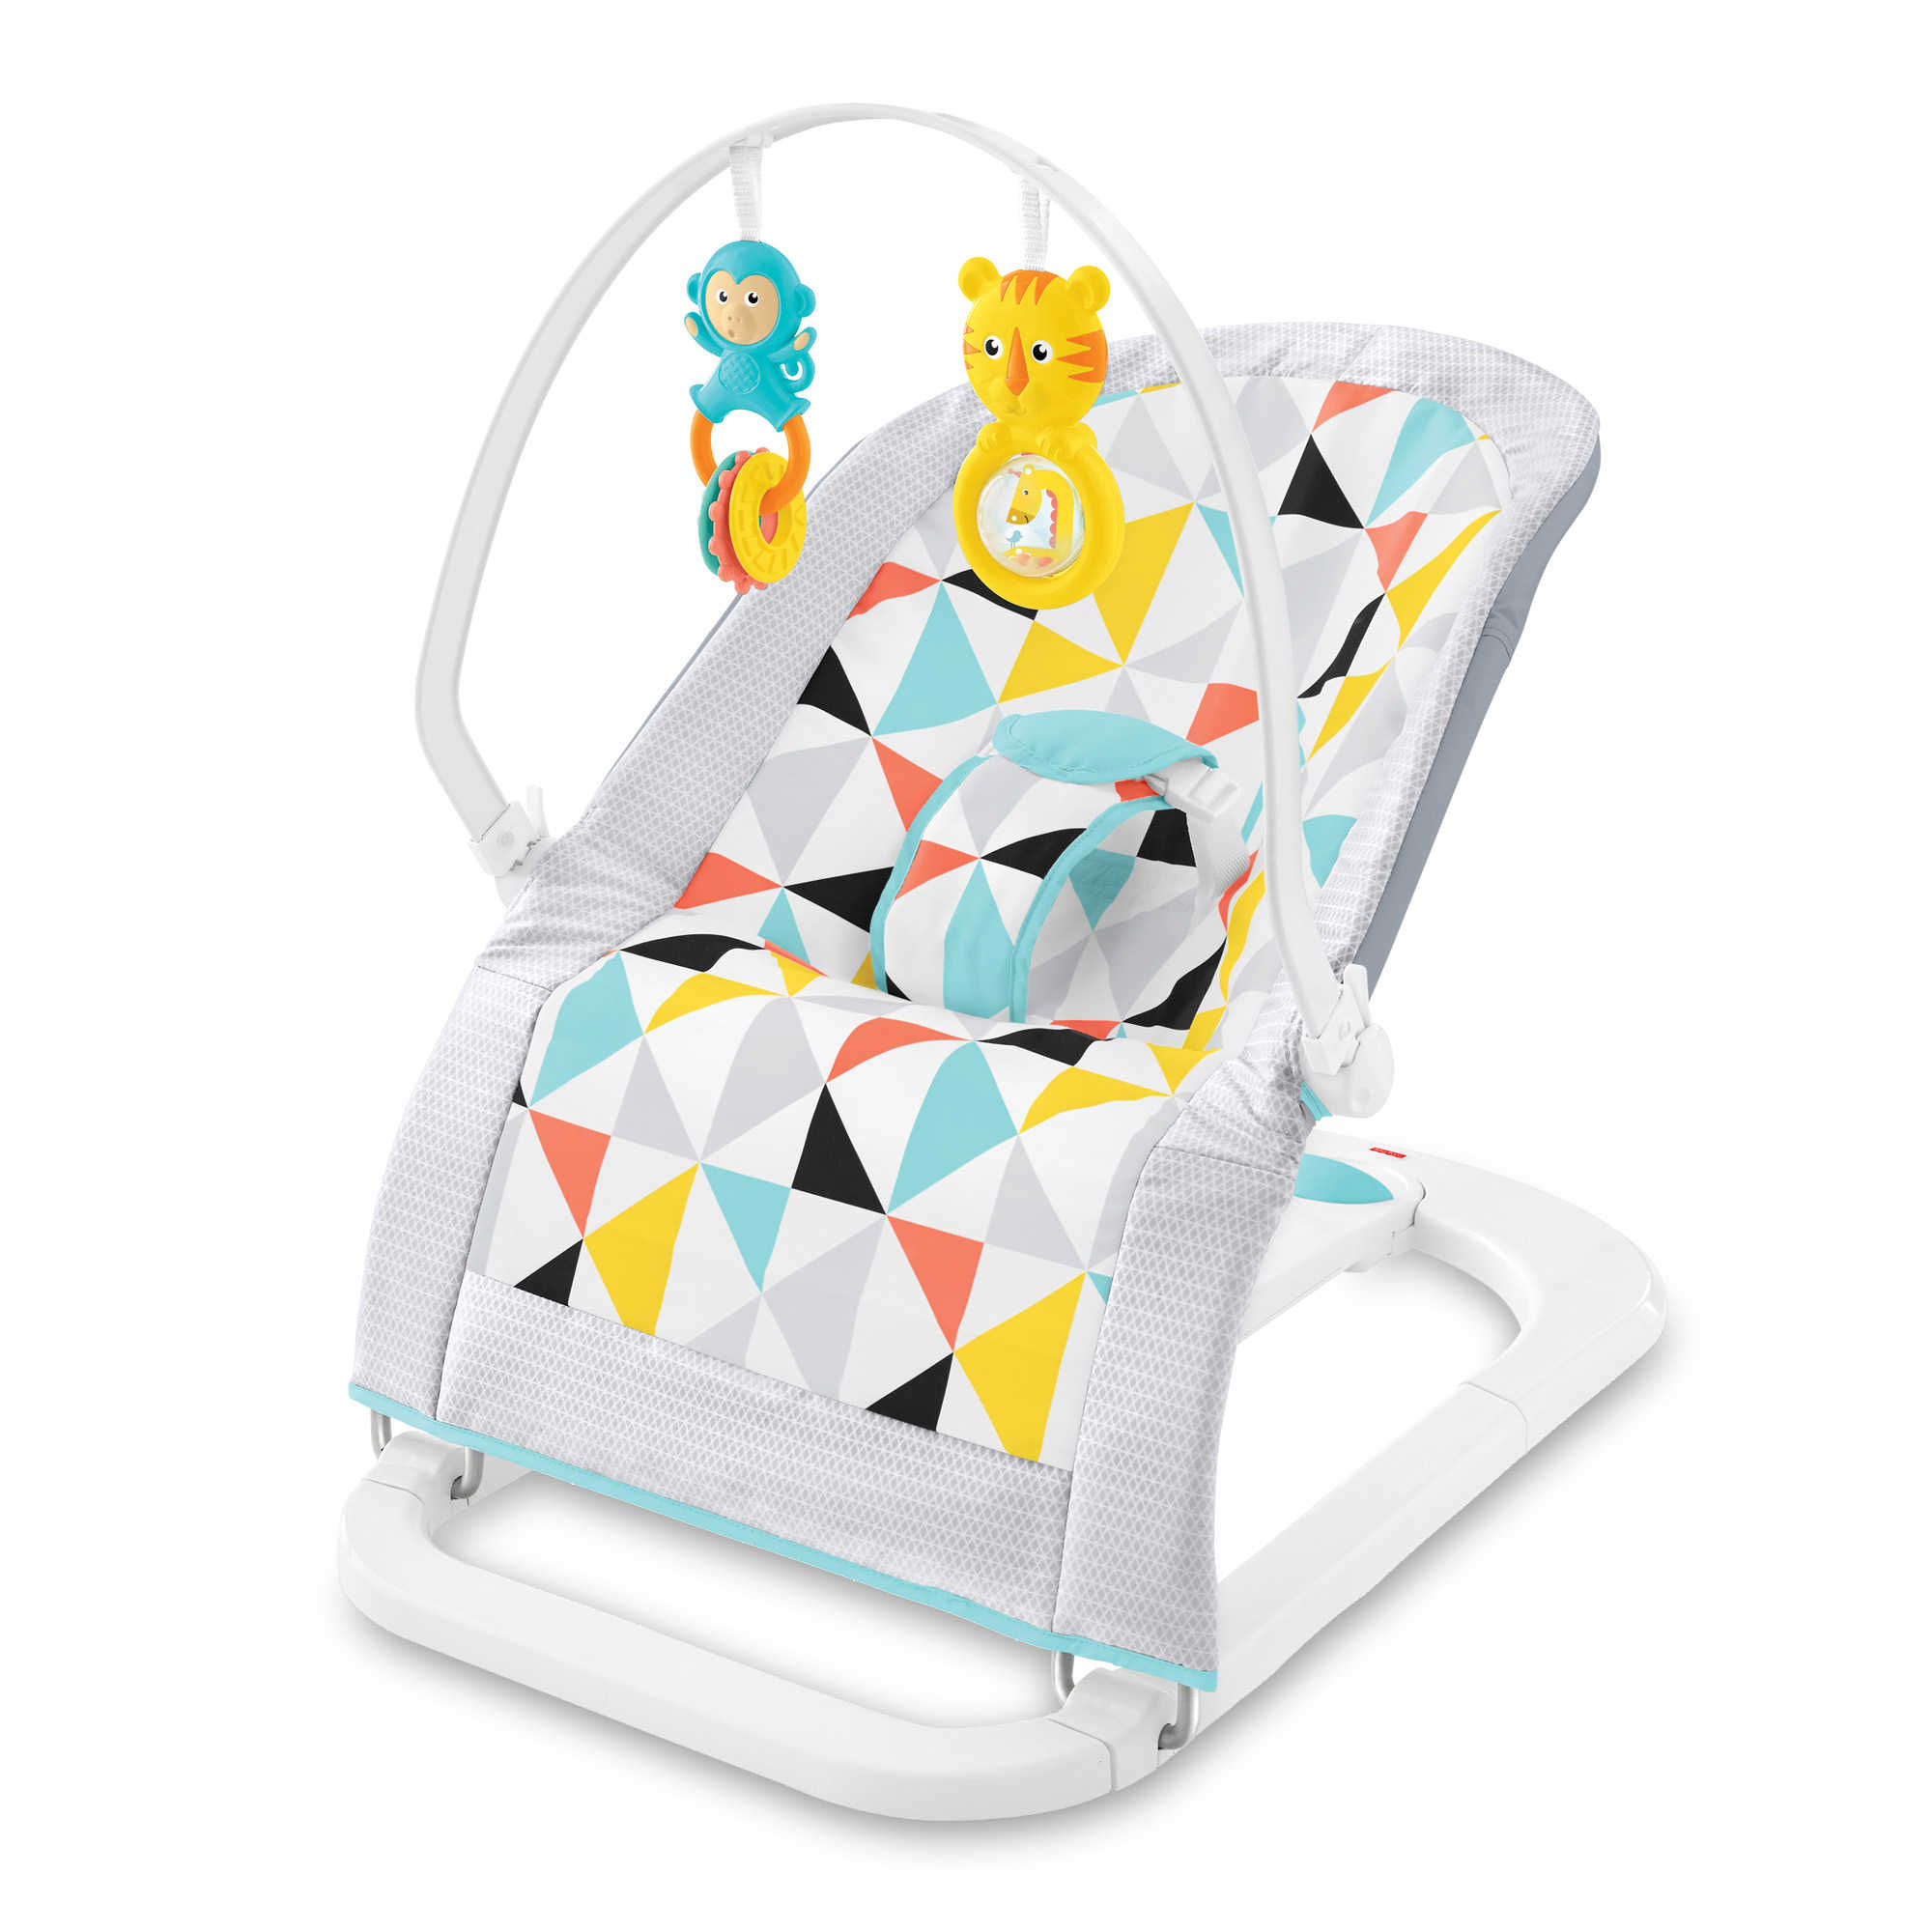 the bouncy chair